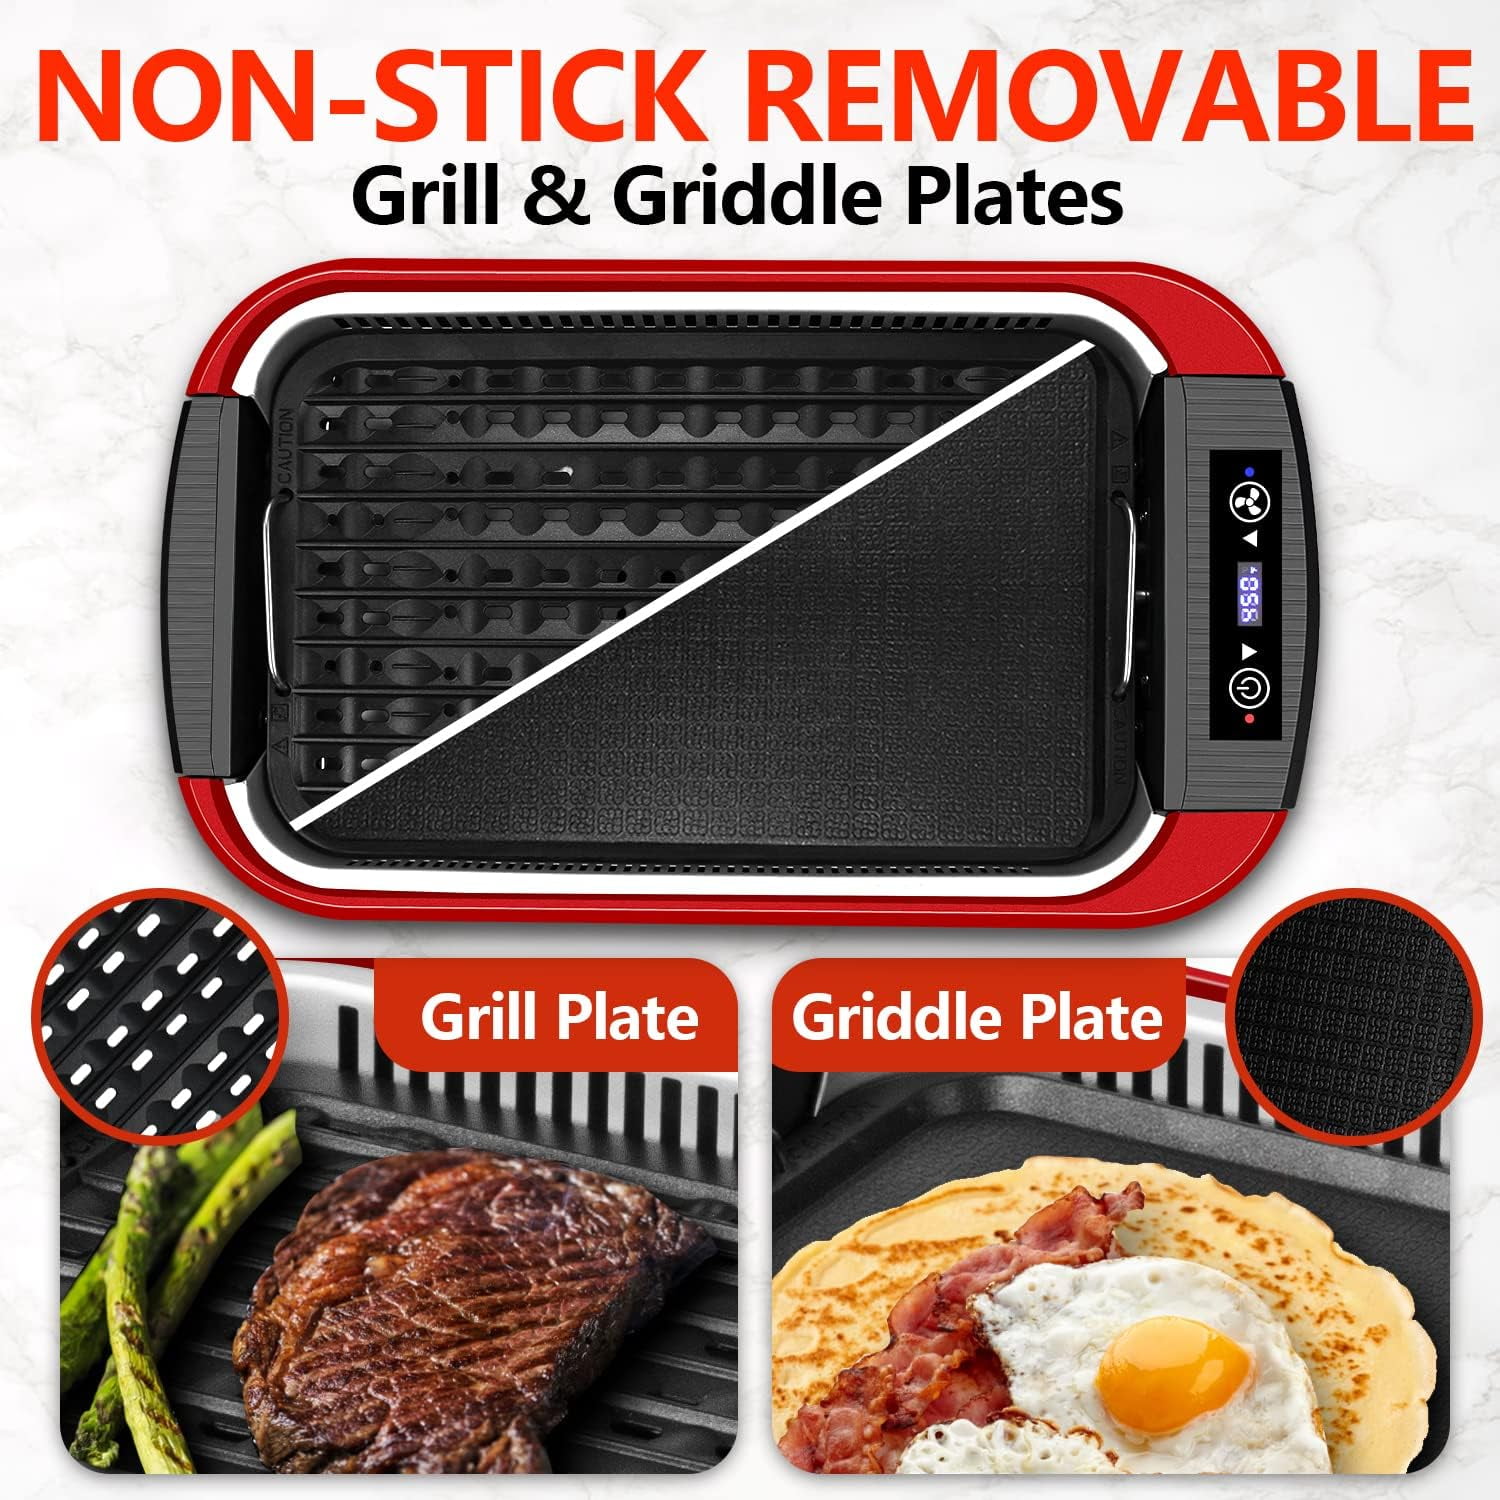 SUEWRITE Electric Smokeless Indoor Grill, Non-Stick Cooking Removable  Plate, Portable Korean BBQ Grill with Removable Temperature Control,  Dishwasher